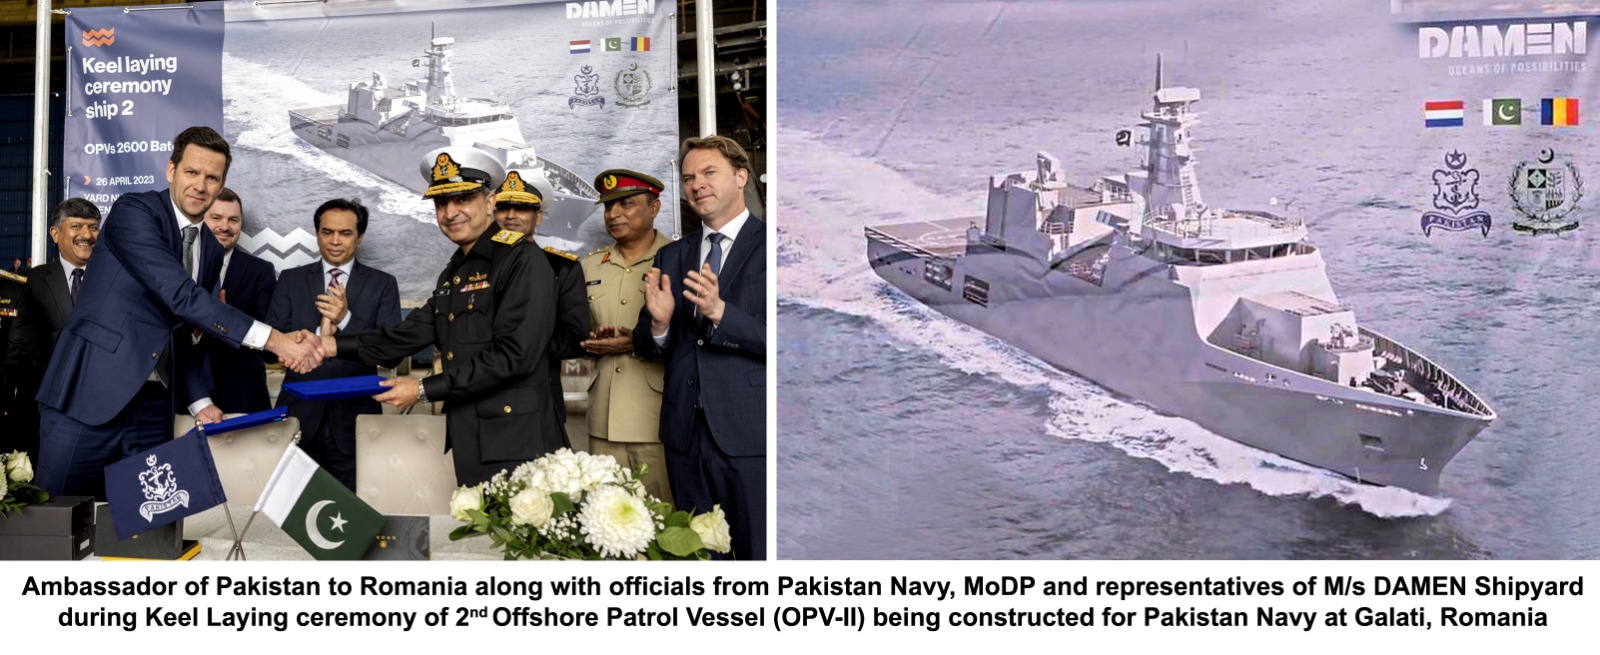 KEEL LAYING CEREMONY OF PAKISTAN NAVY OFFSHORE PATROL VESSEL HELD AT ROMANIA.